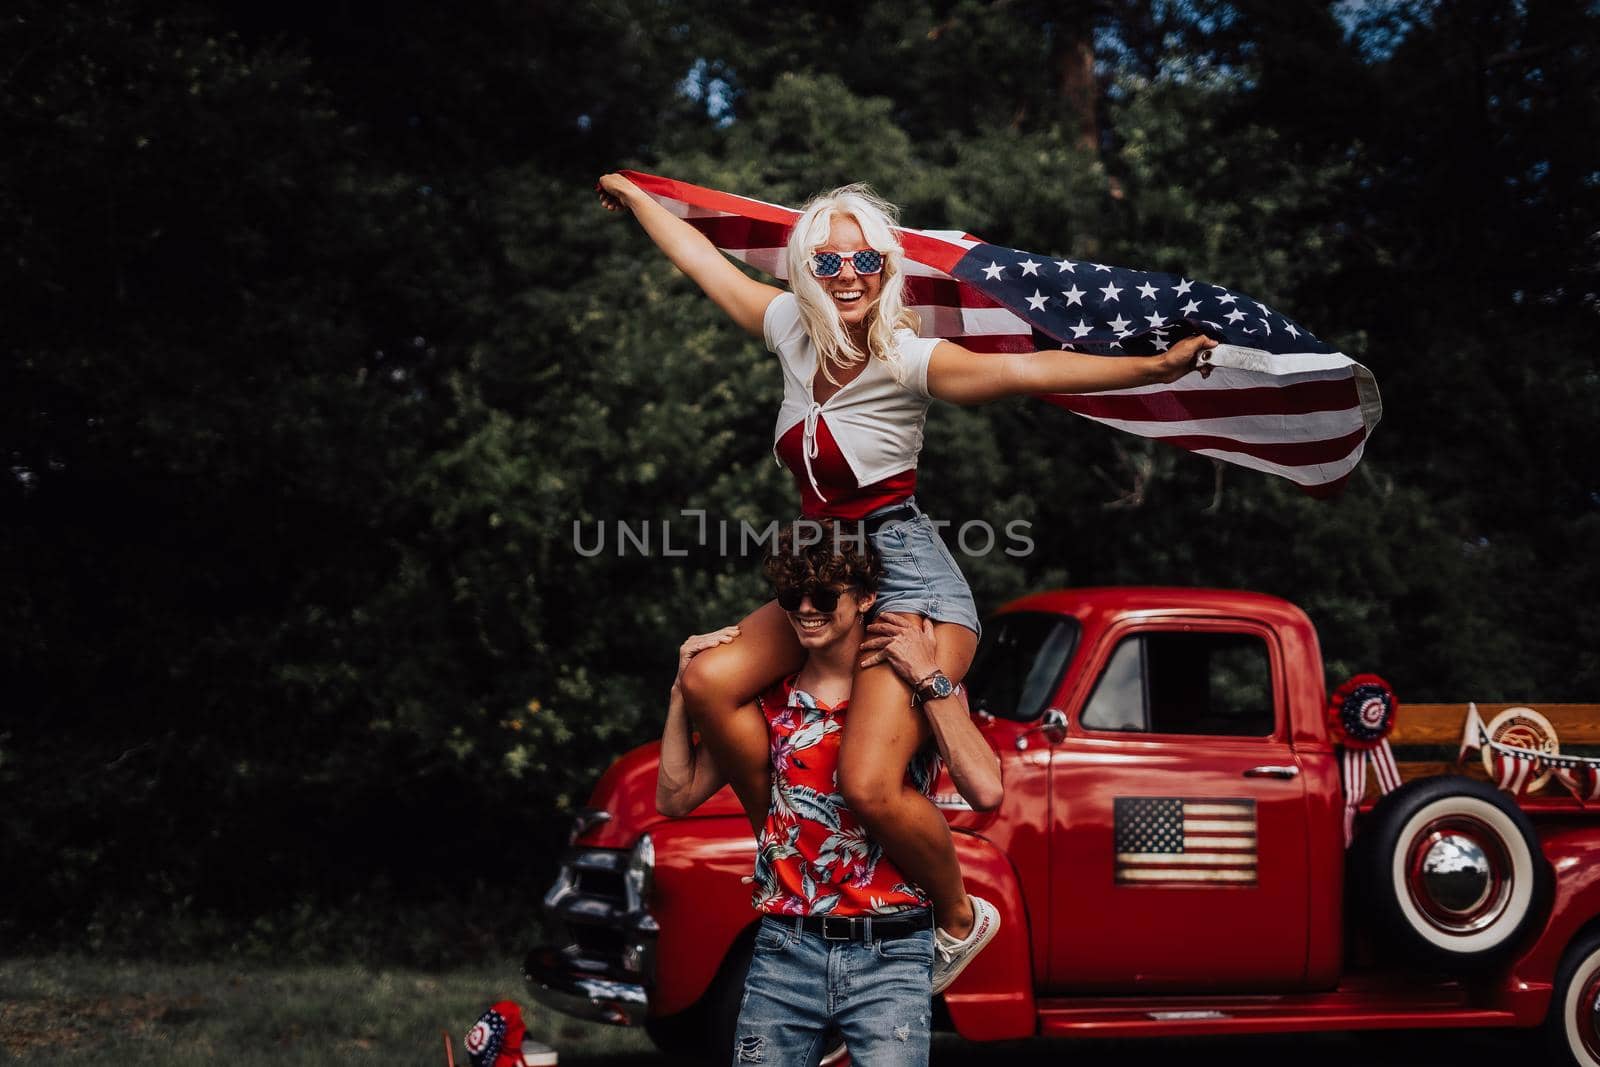 A couple with their vintage truck by castaldostudio